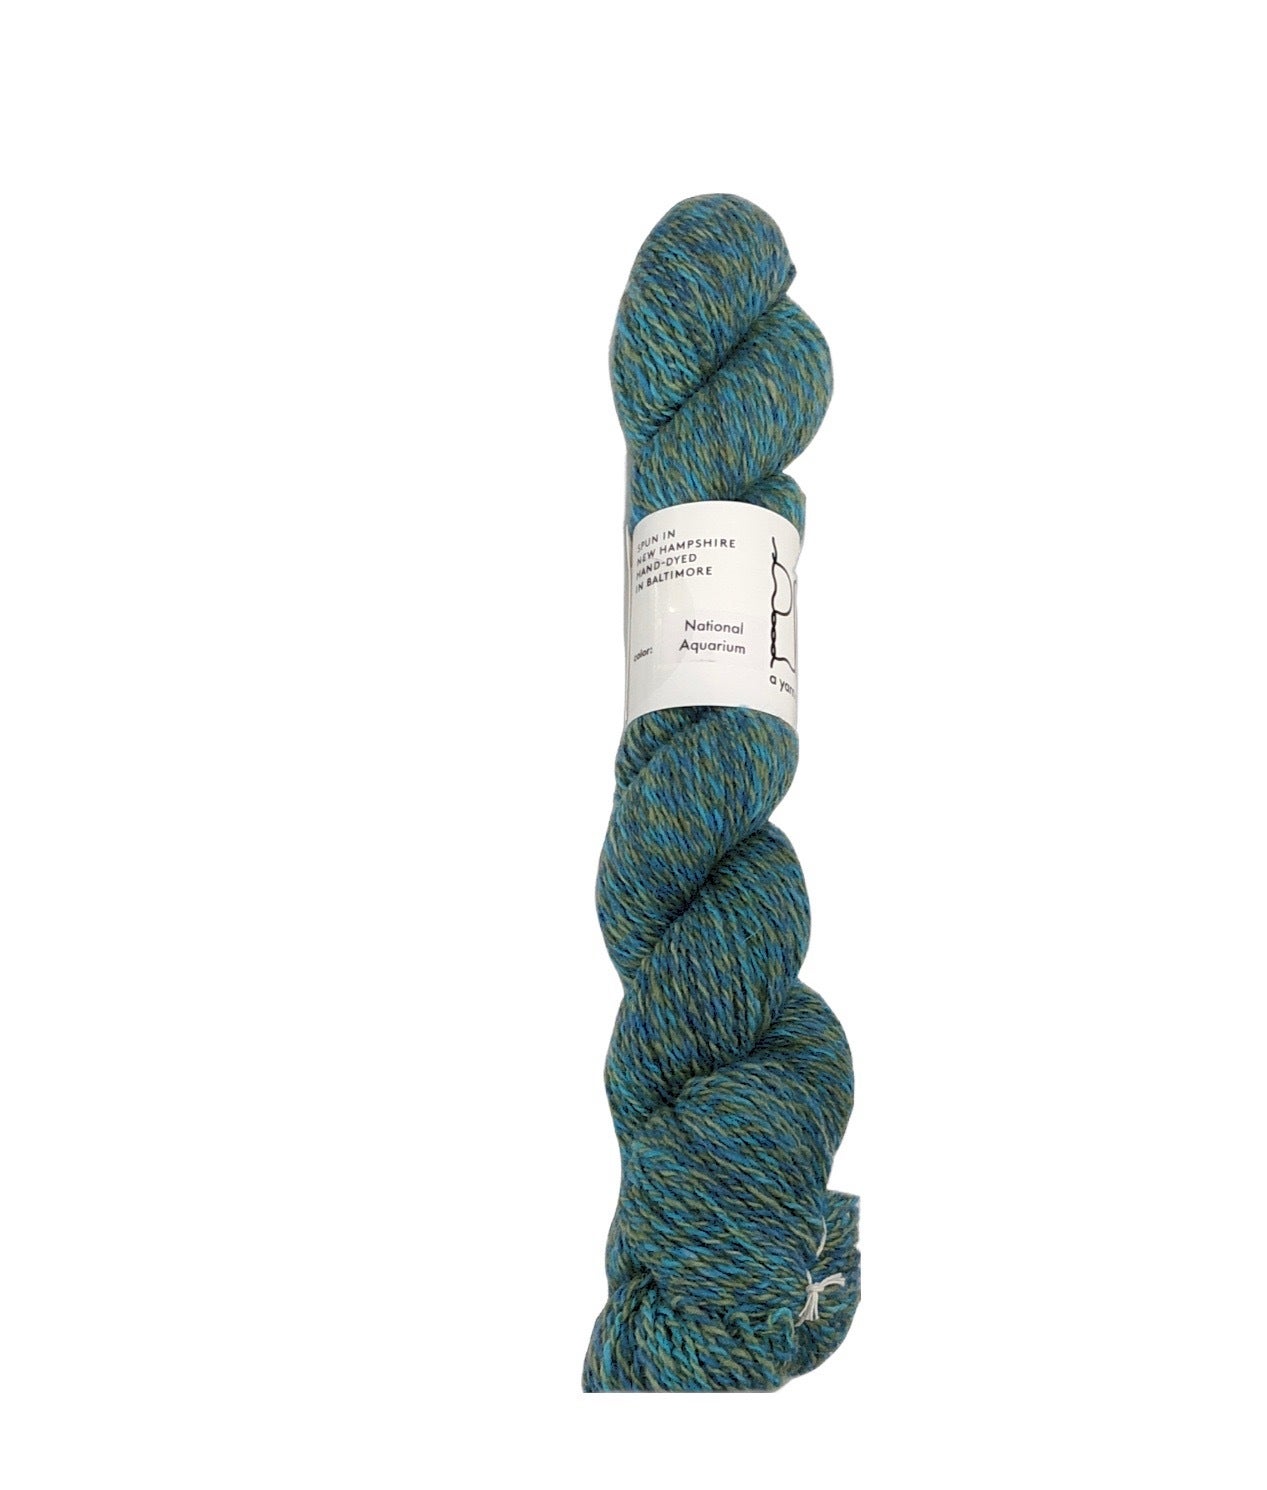 North Ave Fingering/Sport by Plied Yarn Co - On Sale! - Colorful